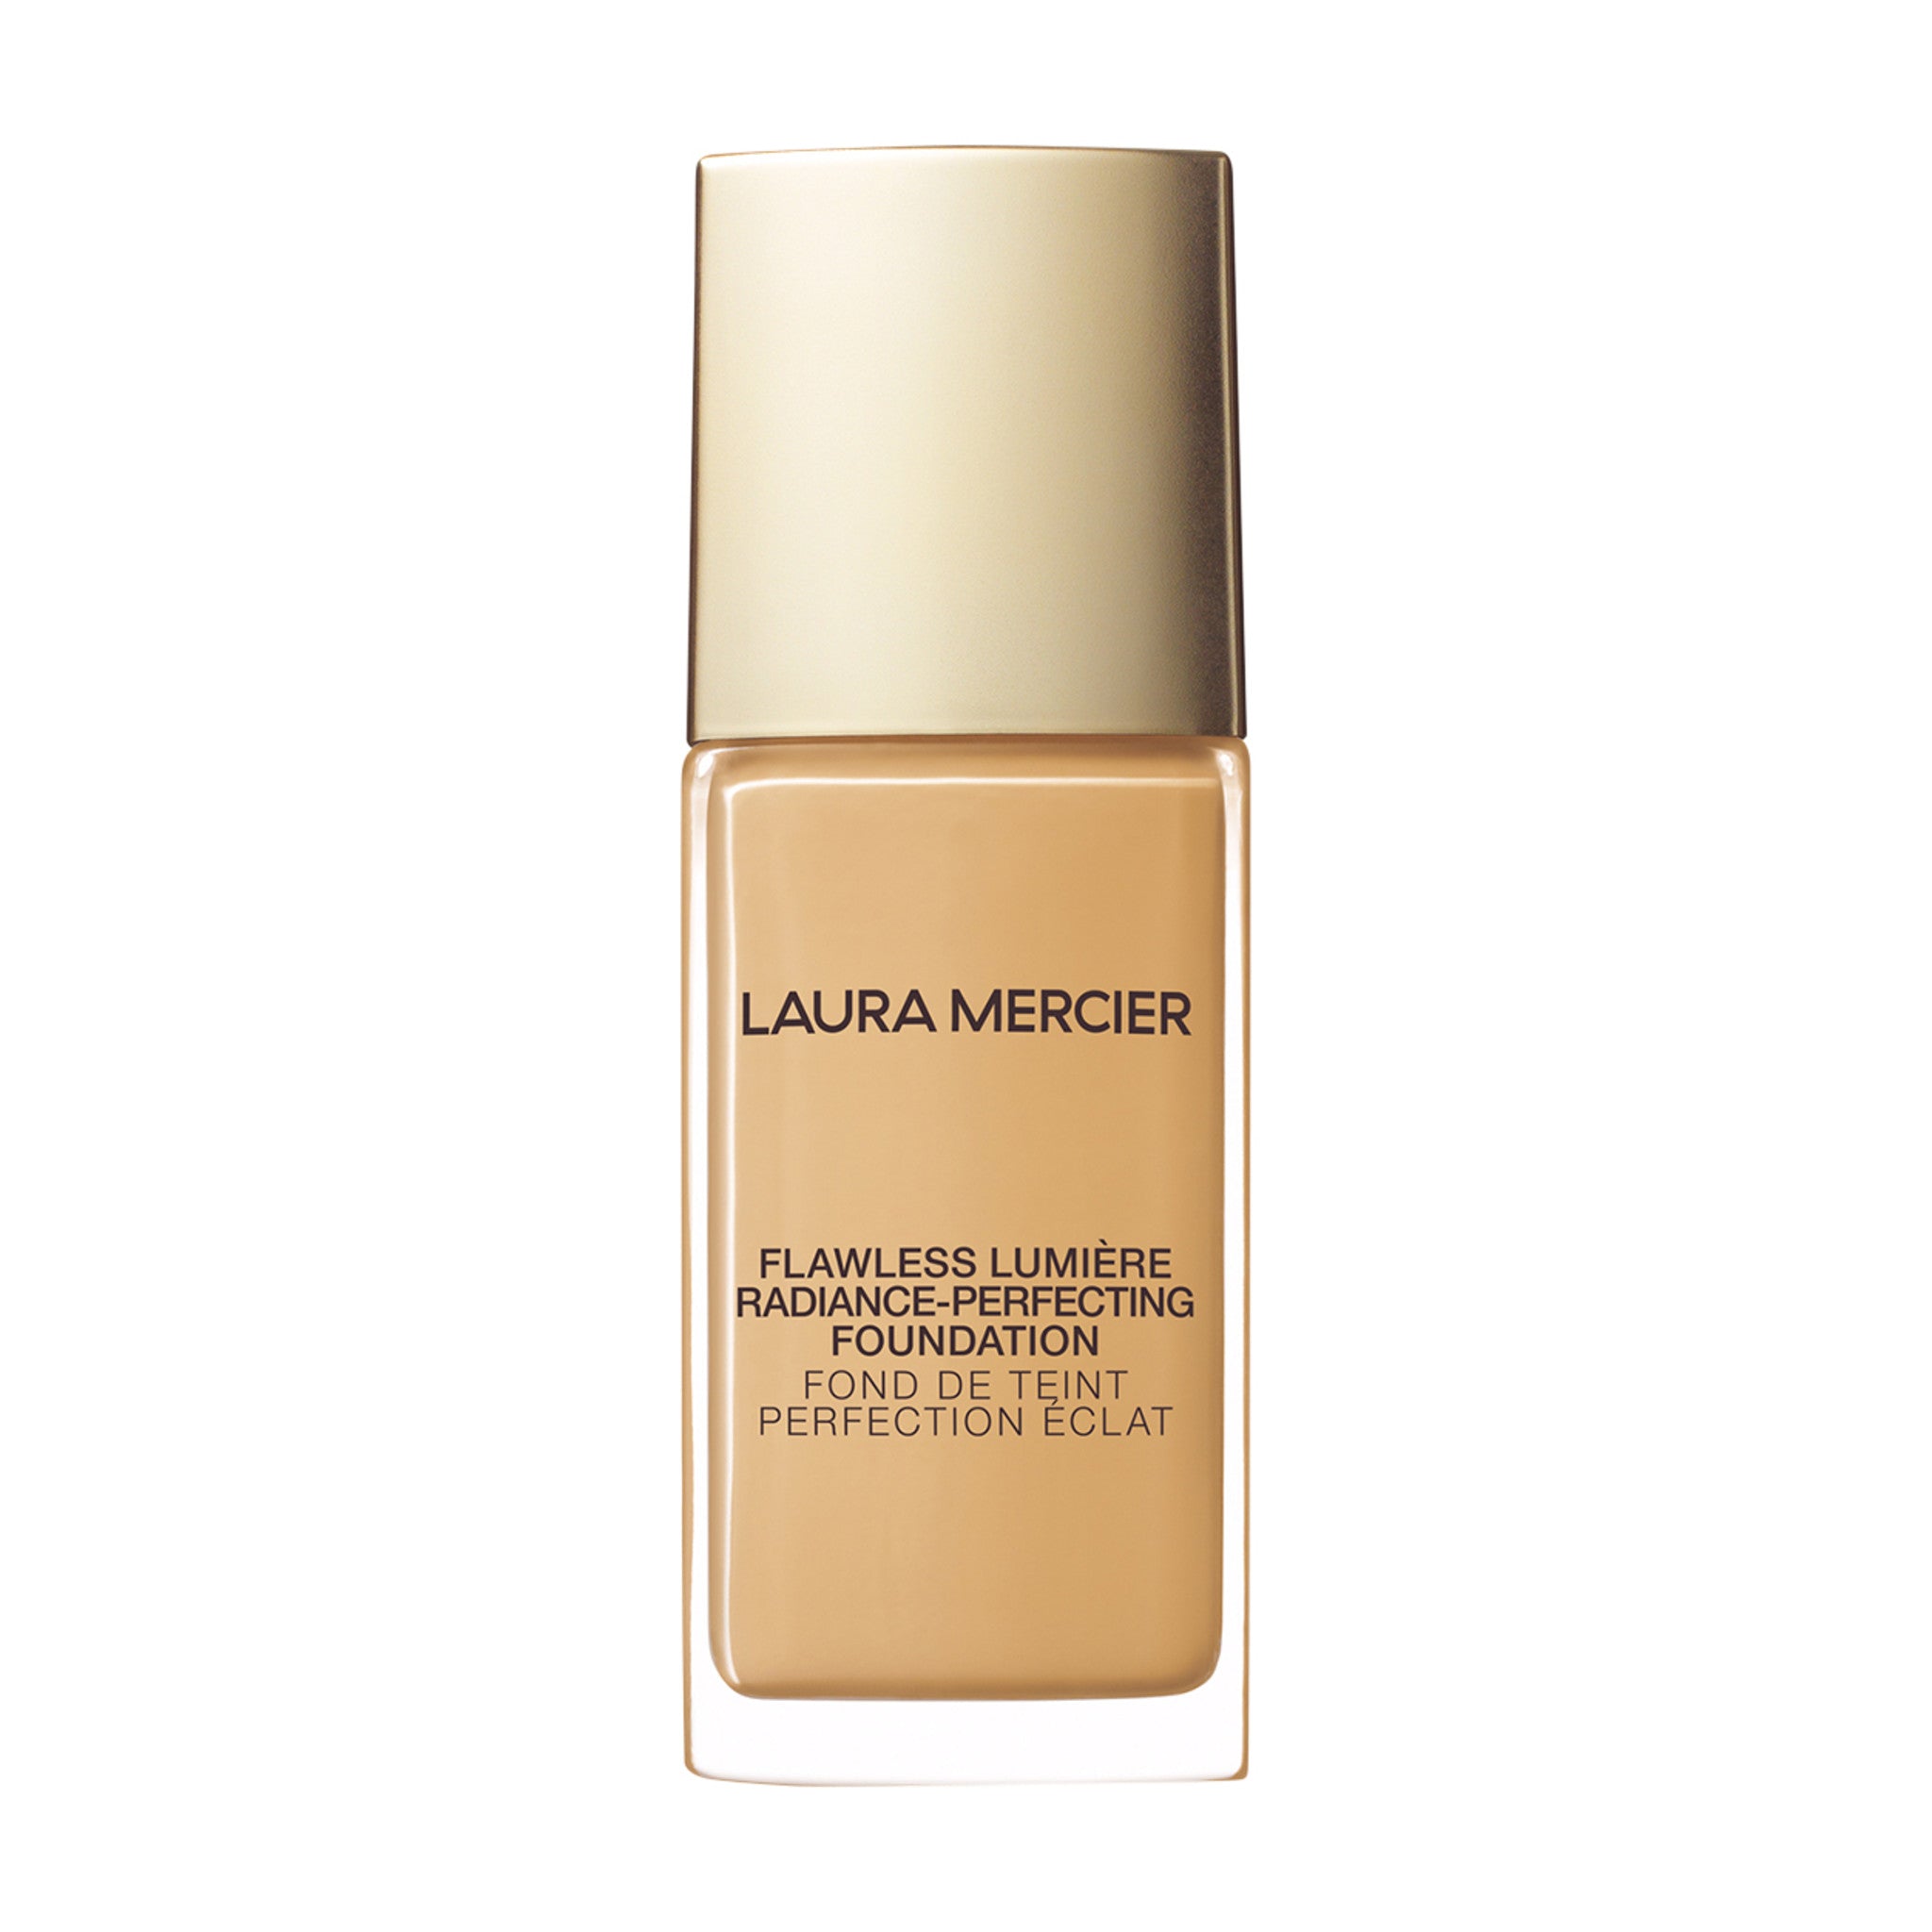 Laura Mercier Flawless Lumiere Radiance-Perfecting Foundation - Latte